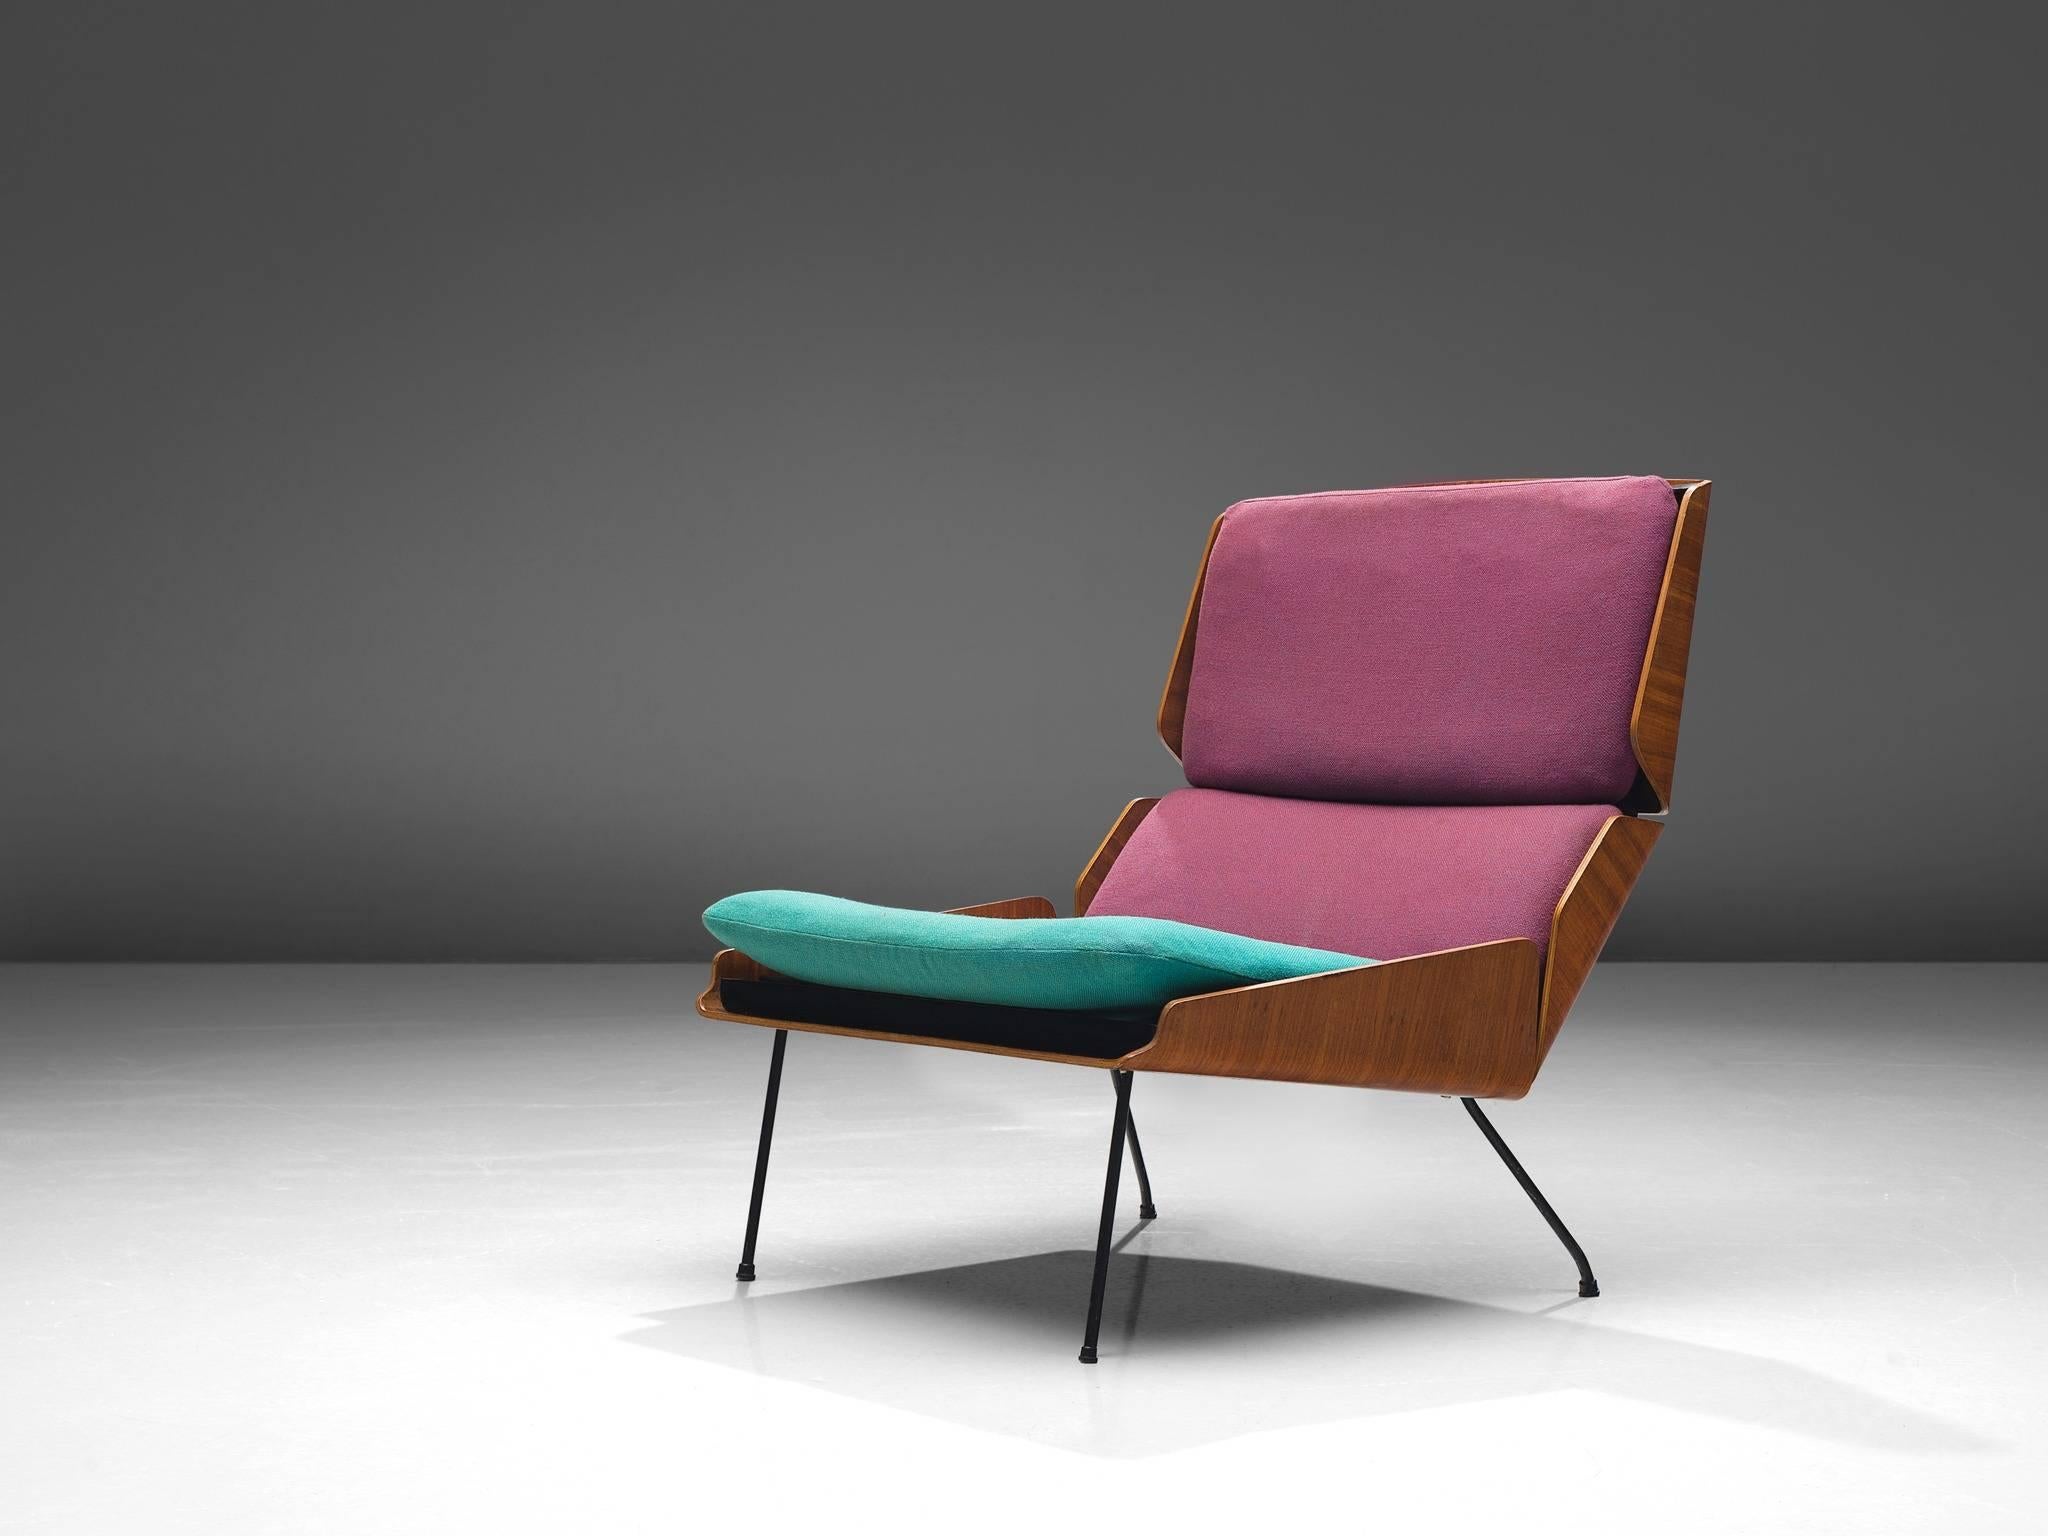 Georges van Rijck for Beaufort, lounge chair, plywood, pink and green upholstery, Belgium, 1959. 

This easy chair by Van Rijck is built up of three plywood pieces, one for the seat and two for the back. The upholstery has two different colors,